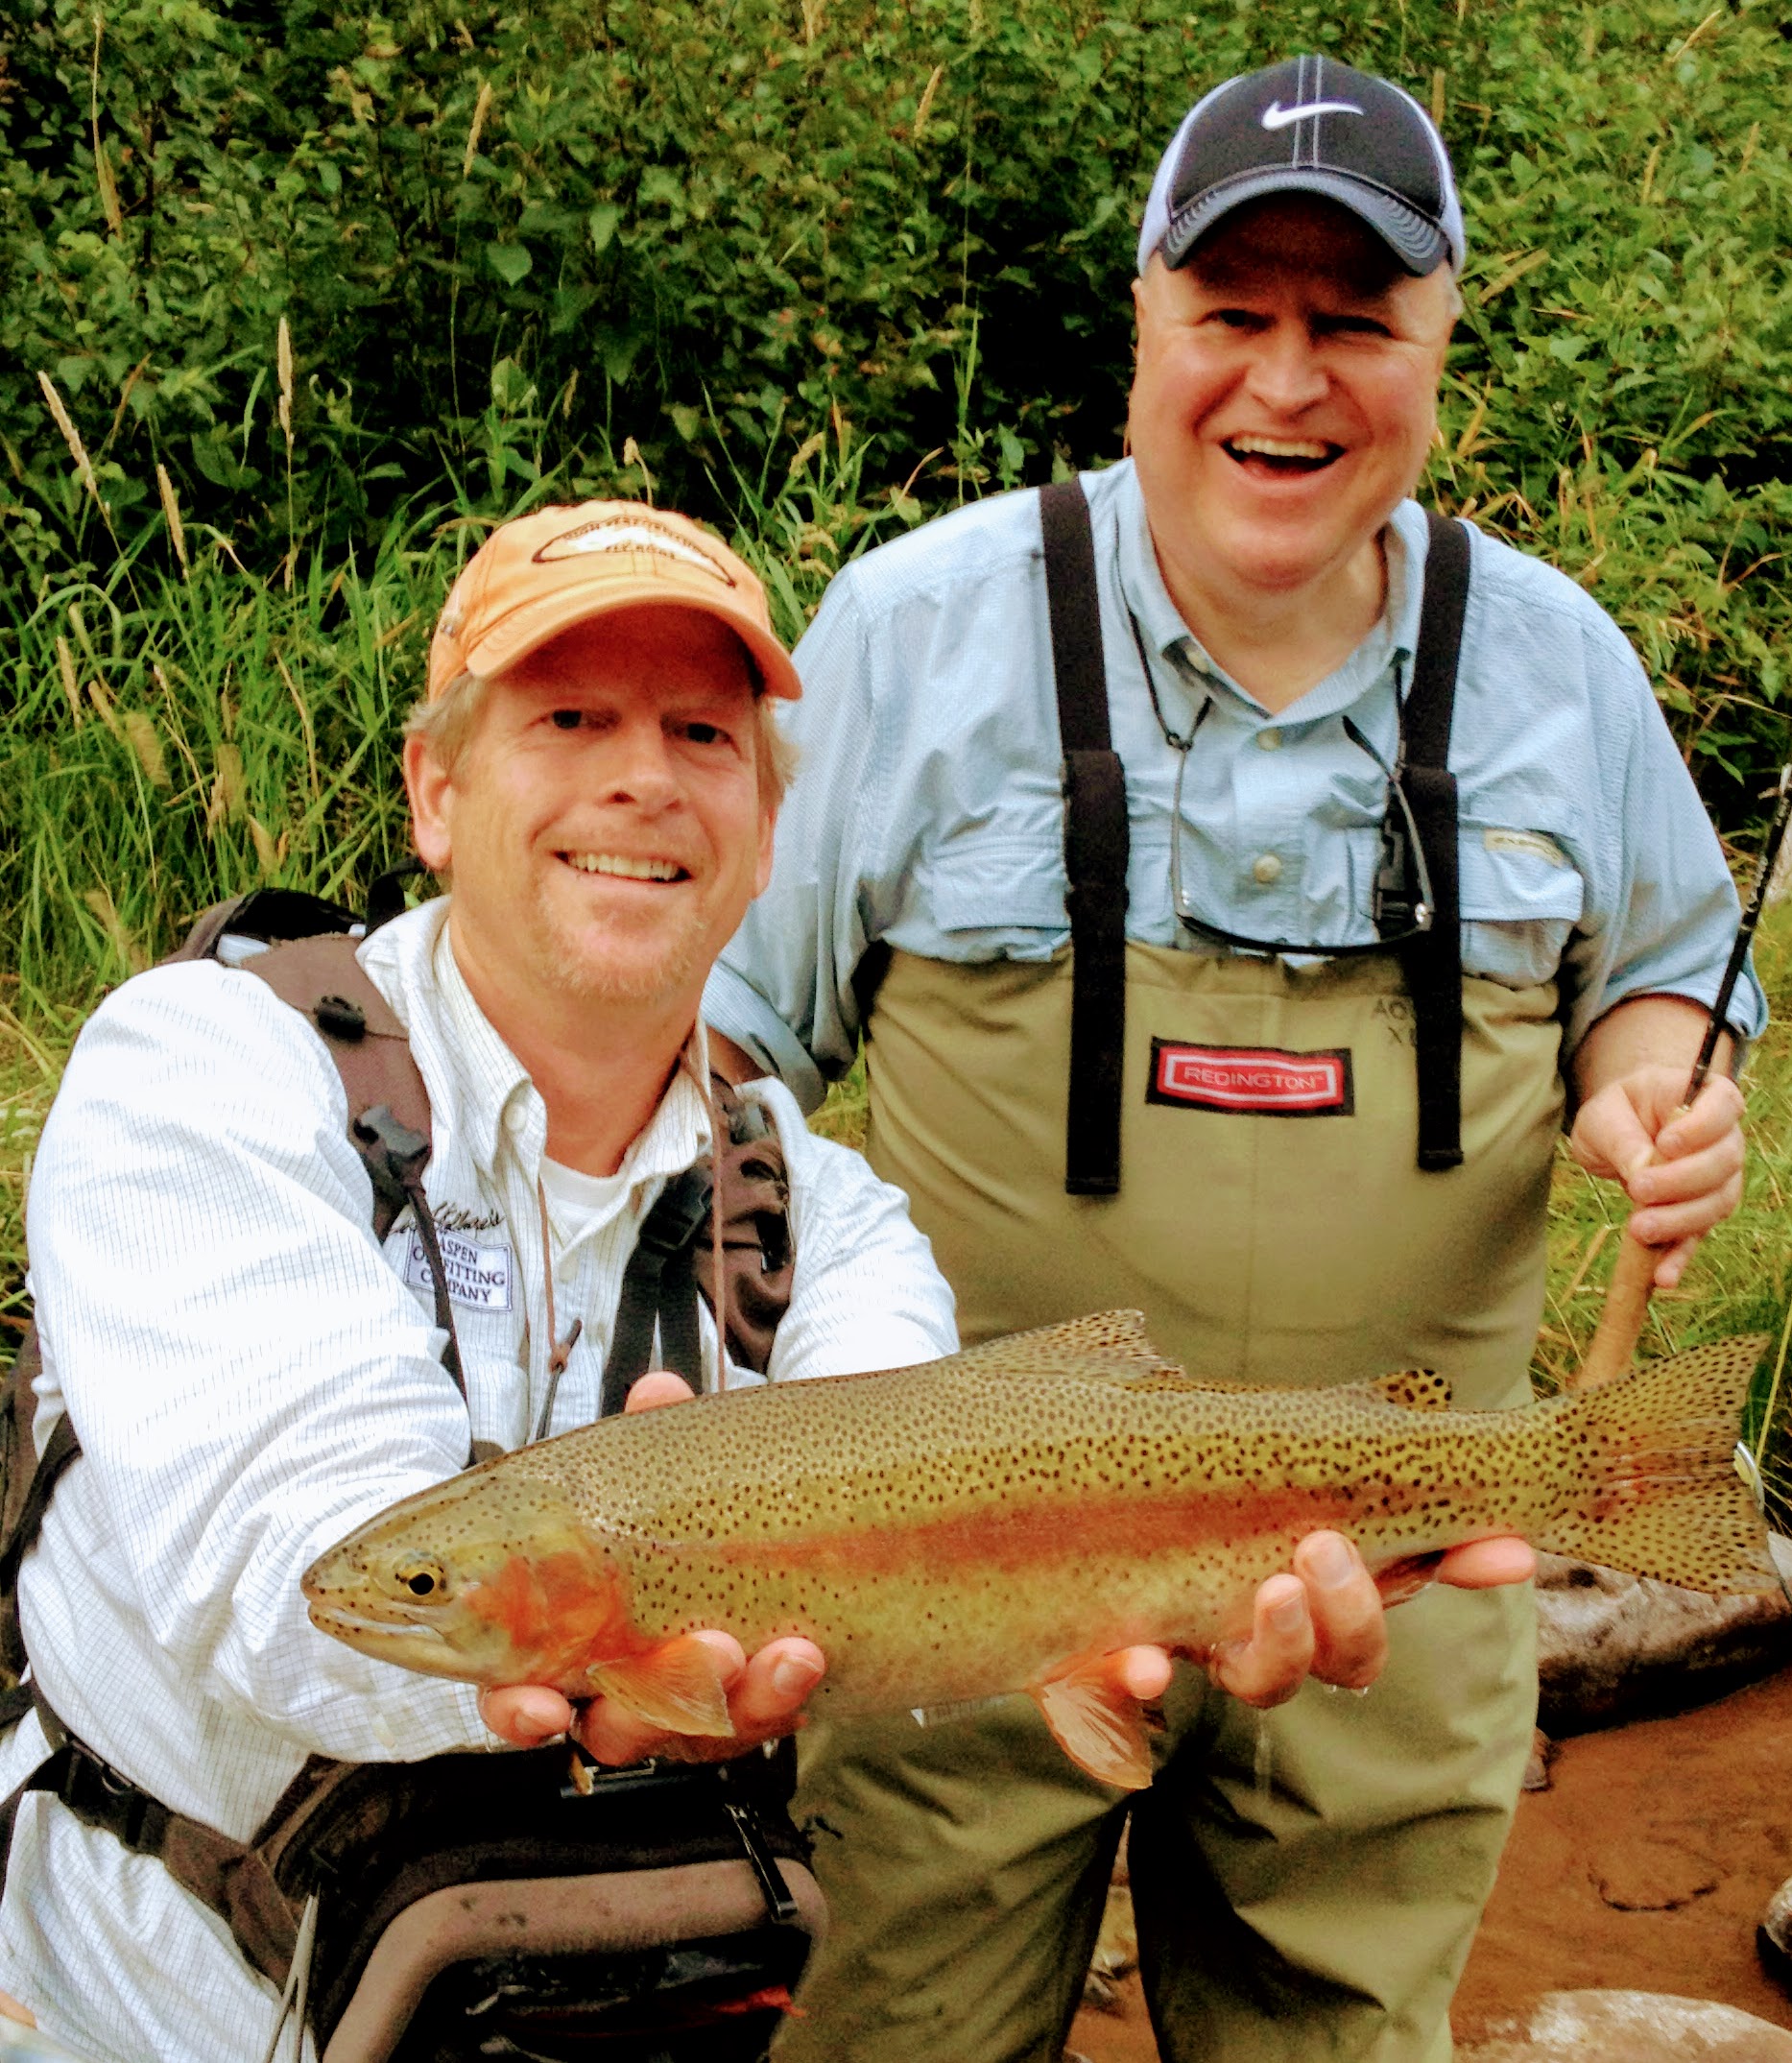 John Dietsch Aspen Trout Guide Fishing with Man in waders in Colorado rivers